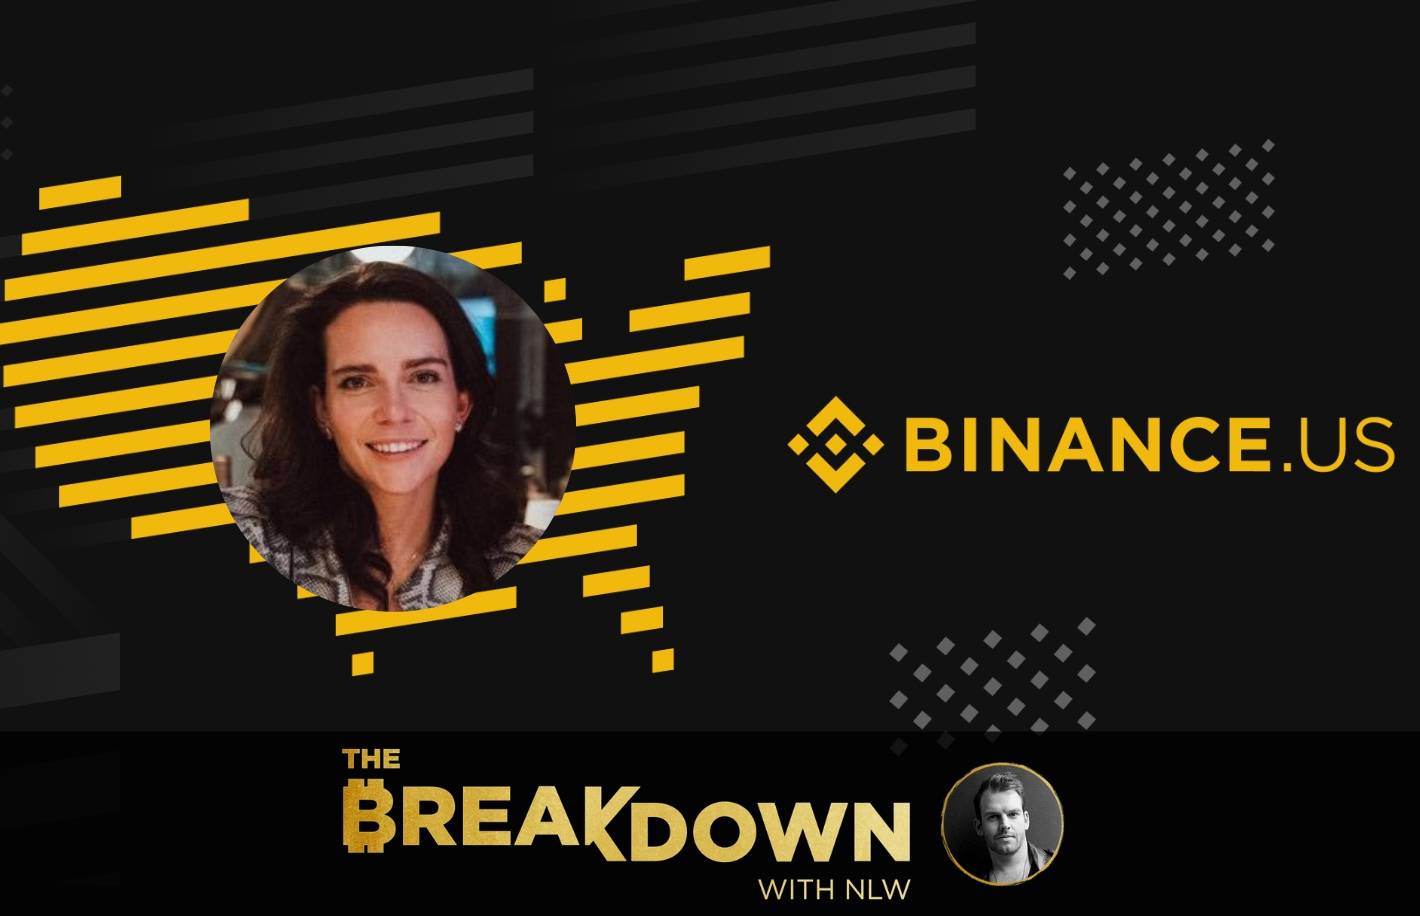 Binance-us-ceo-catherine-coley-explains-why-crypto-exchanges-are-rushing-into-staking